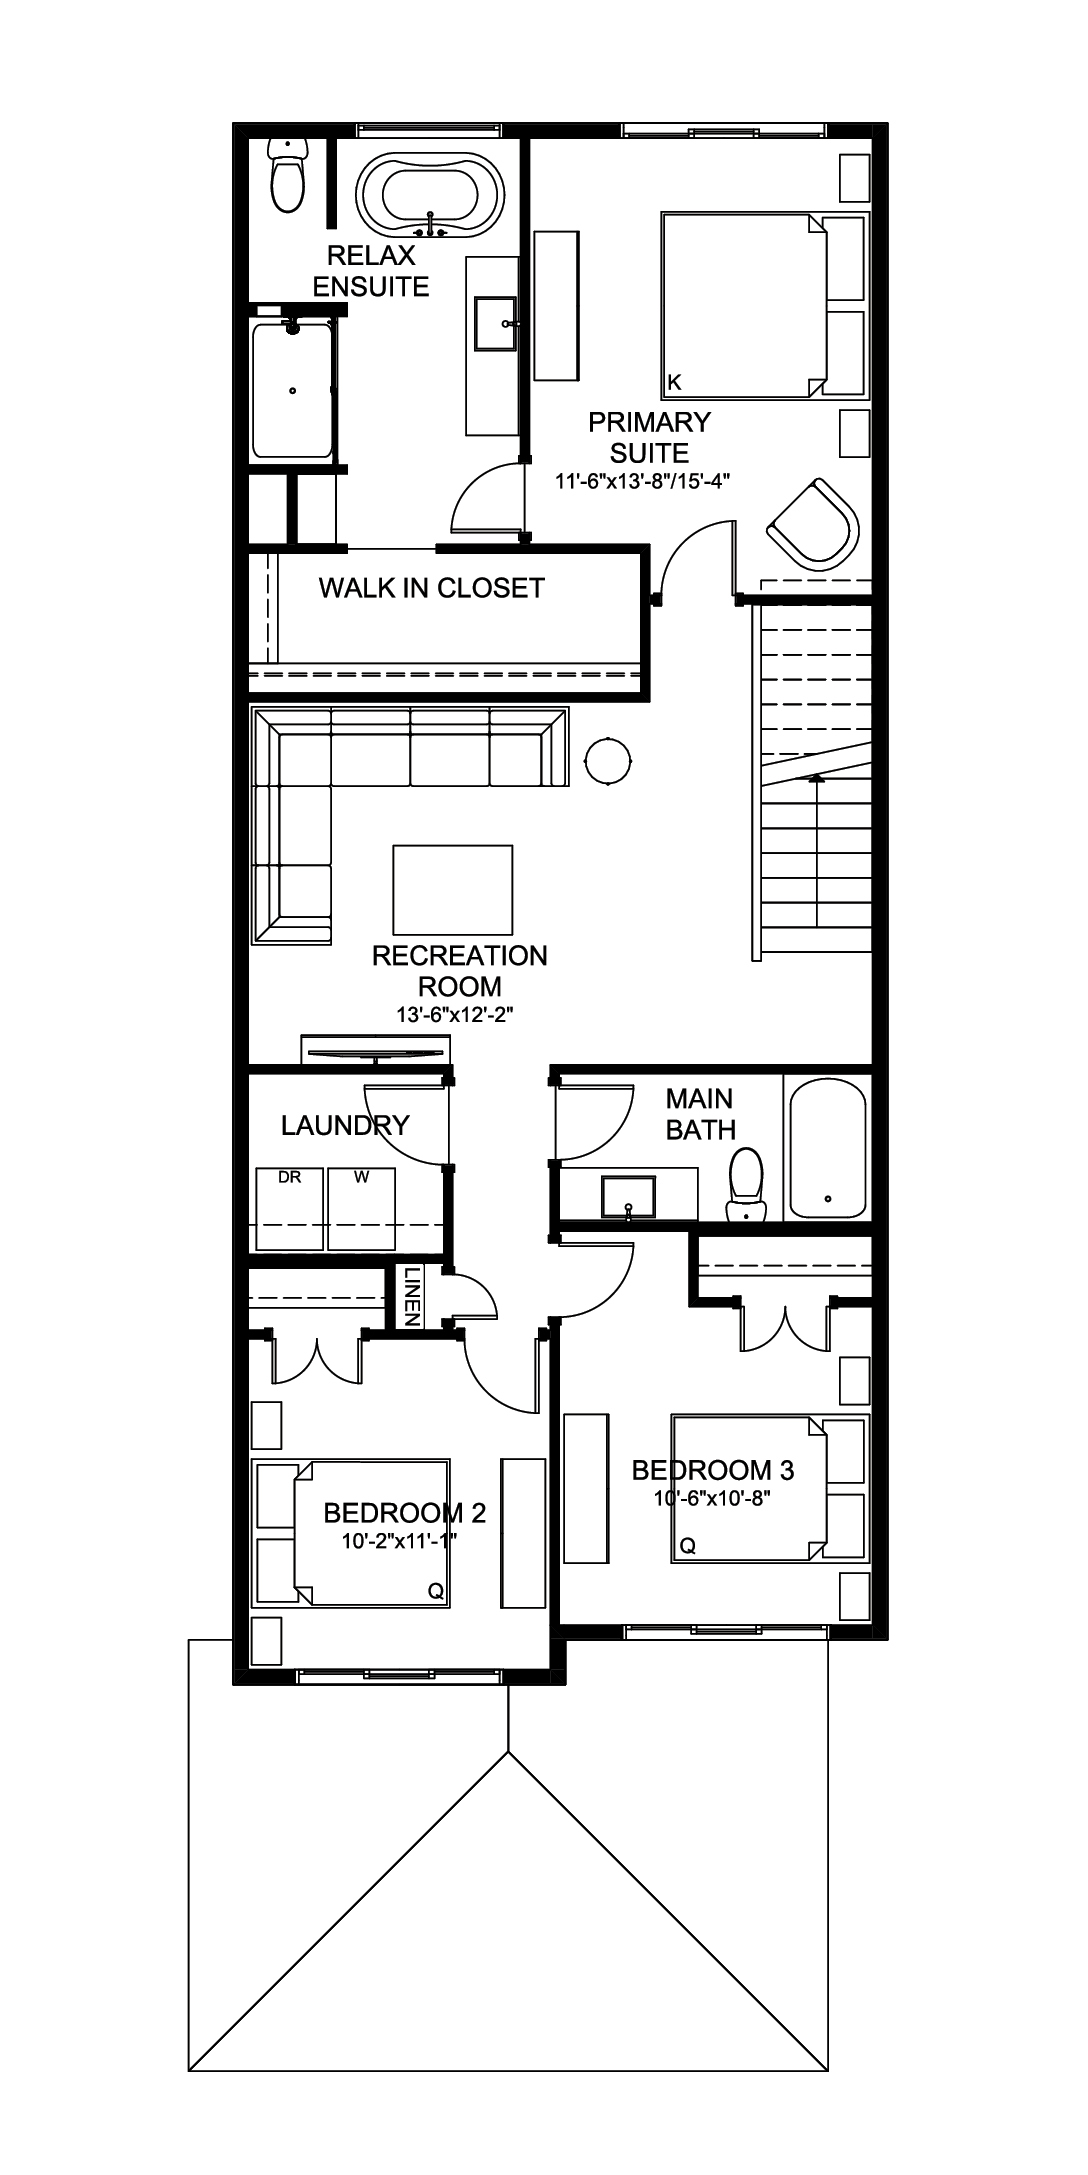 Entertain Impression 22 Floor Plan of The Hills at Charlesworth Cantiro Homes with undefined beds